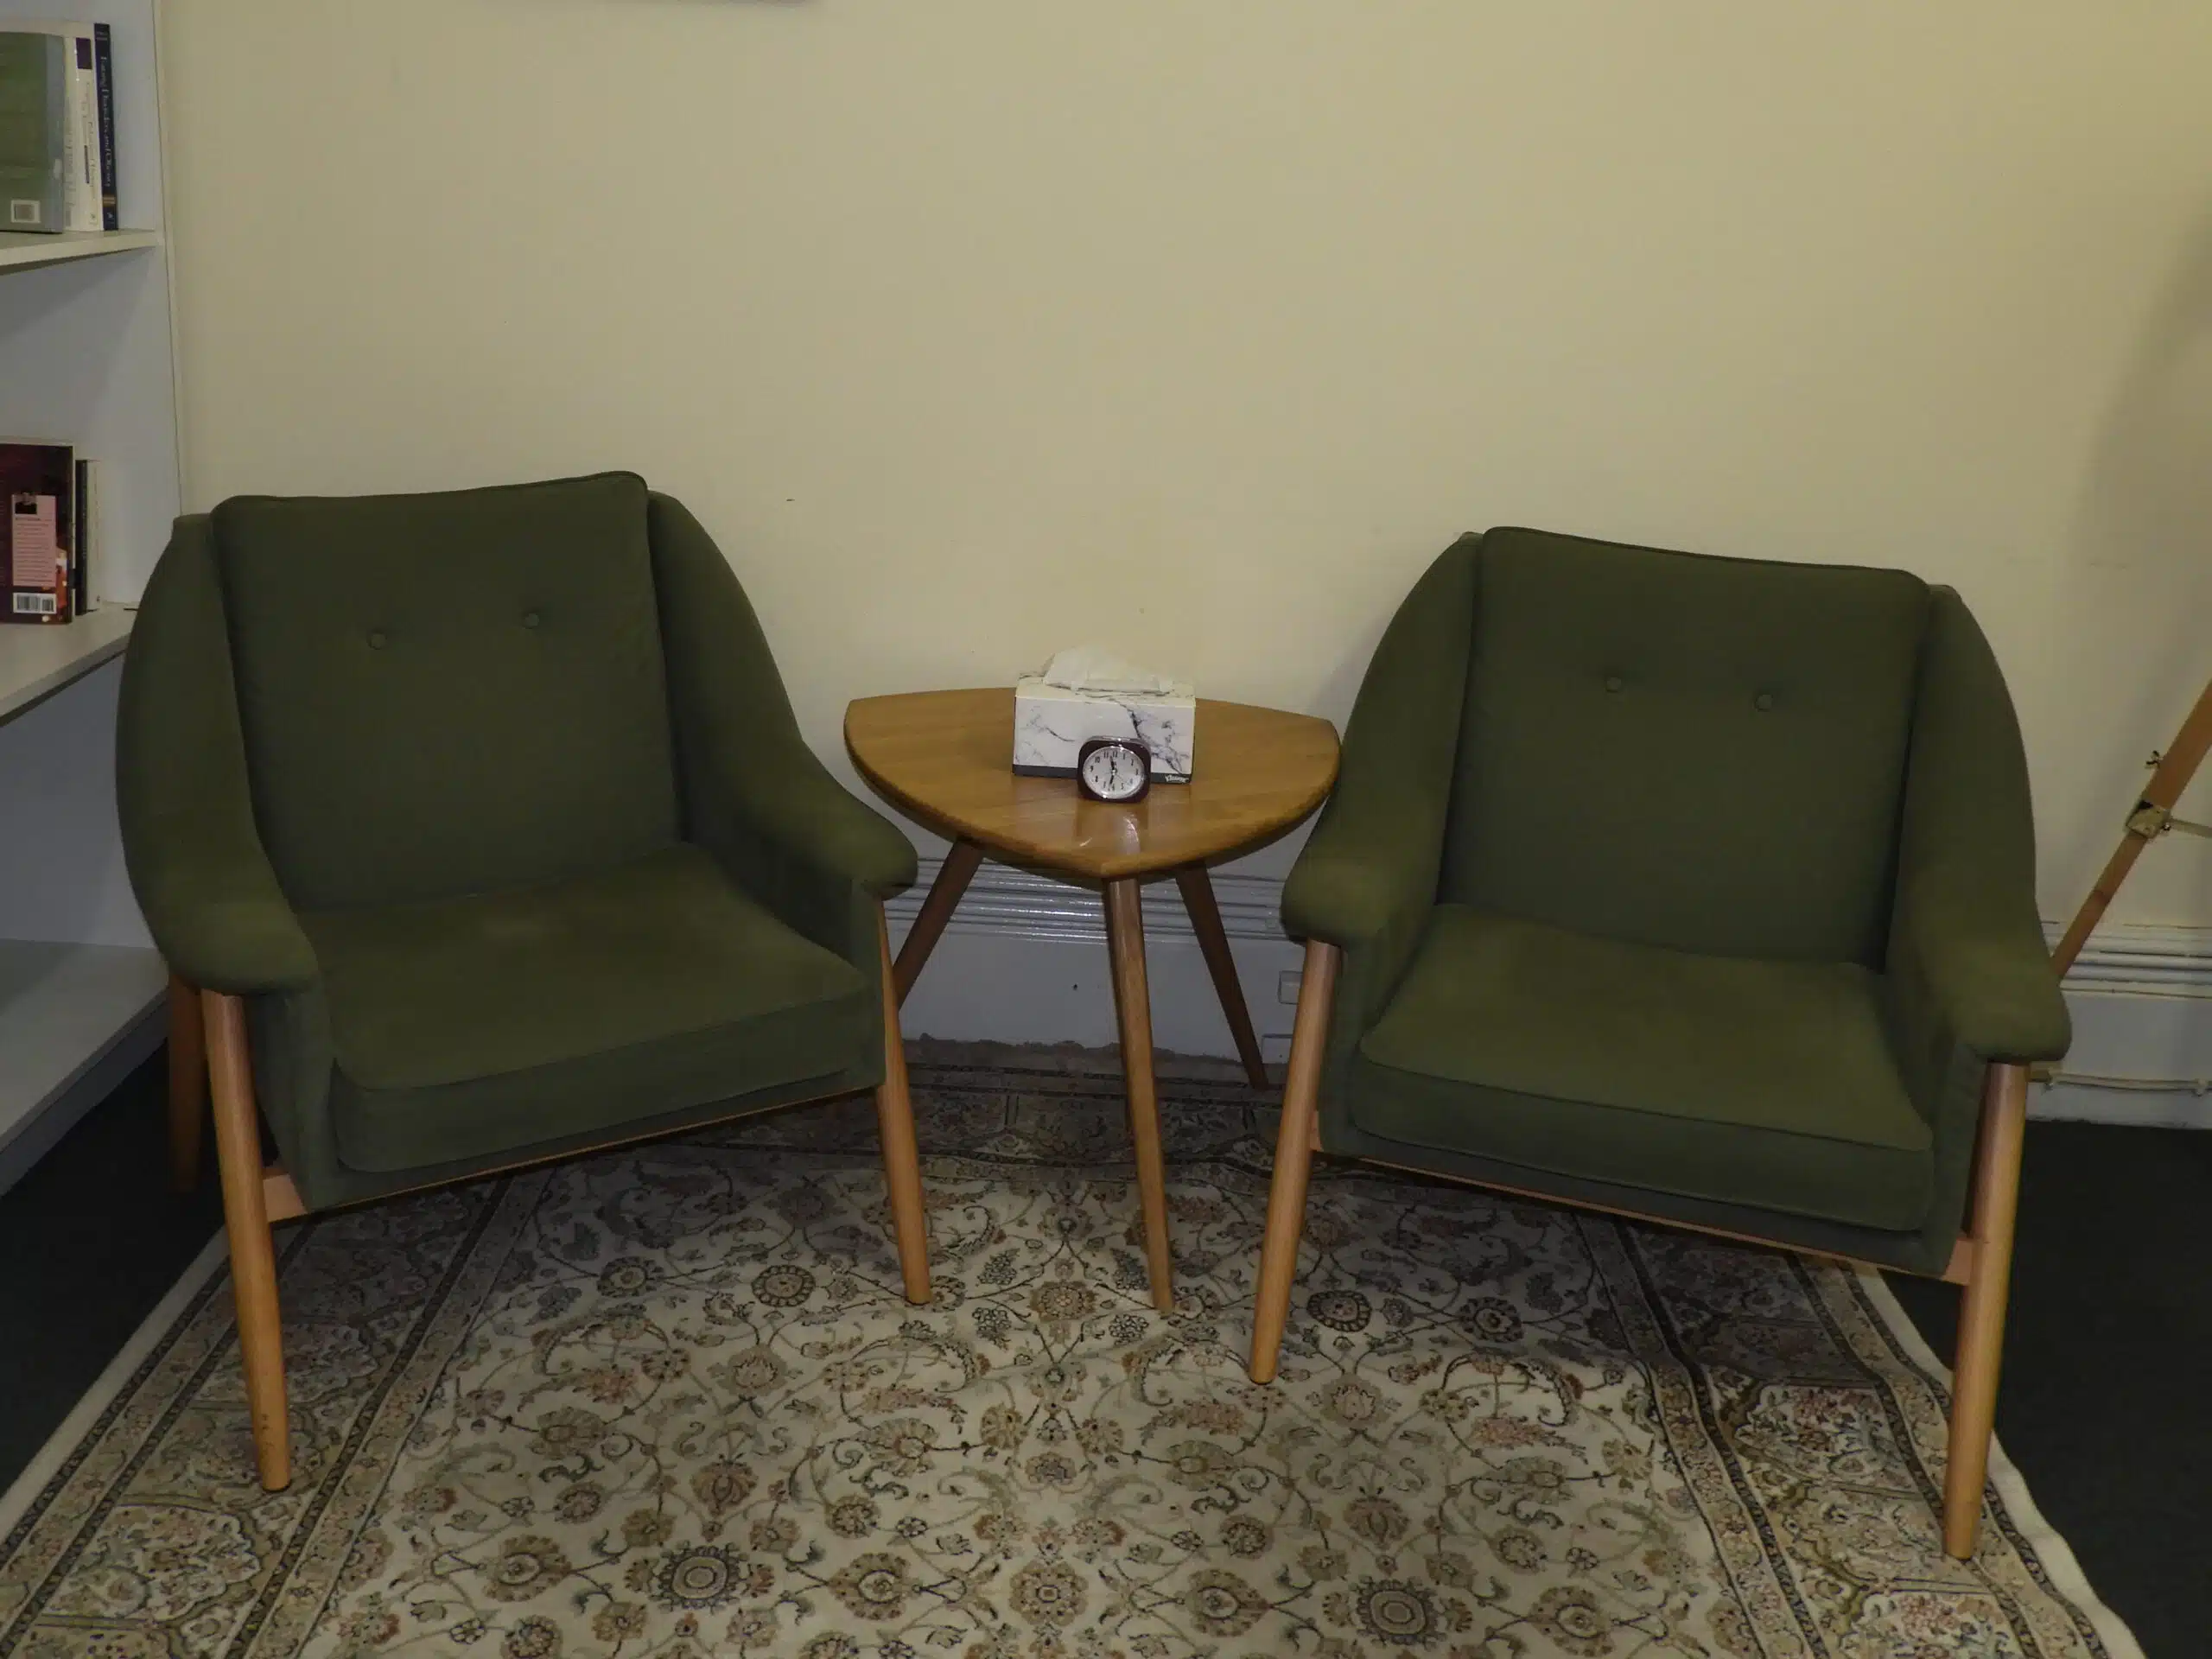 A picture of two green chairs, taken inside Dynamic Psychotherapy's Carlton, Melbourne Psychology Clinic